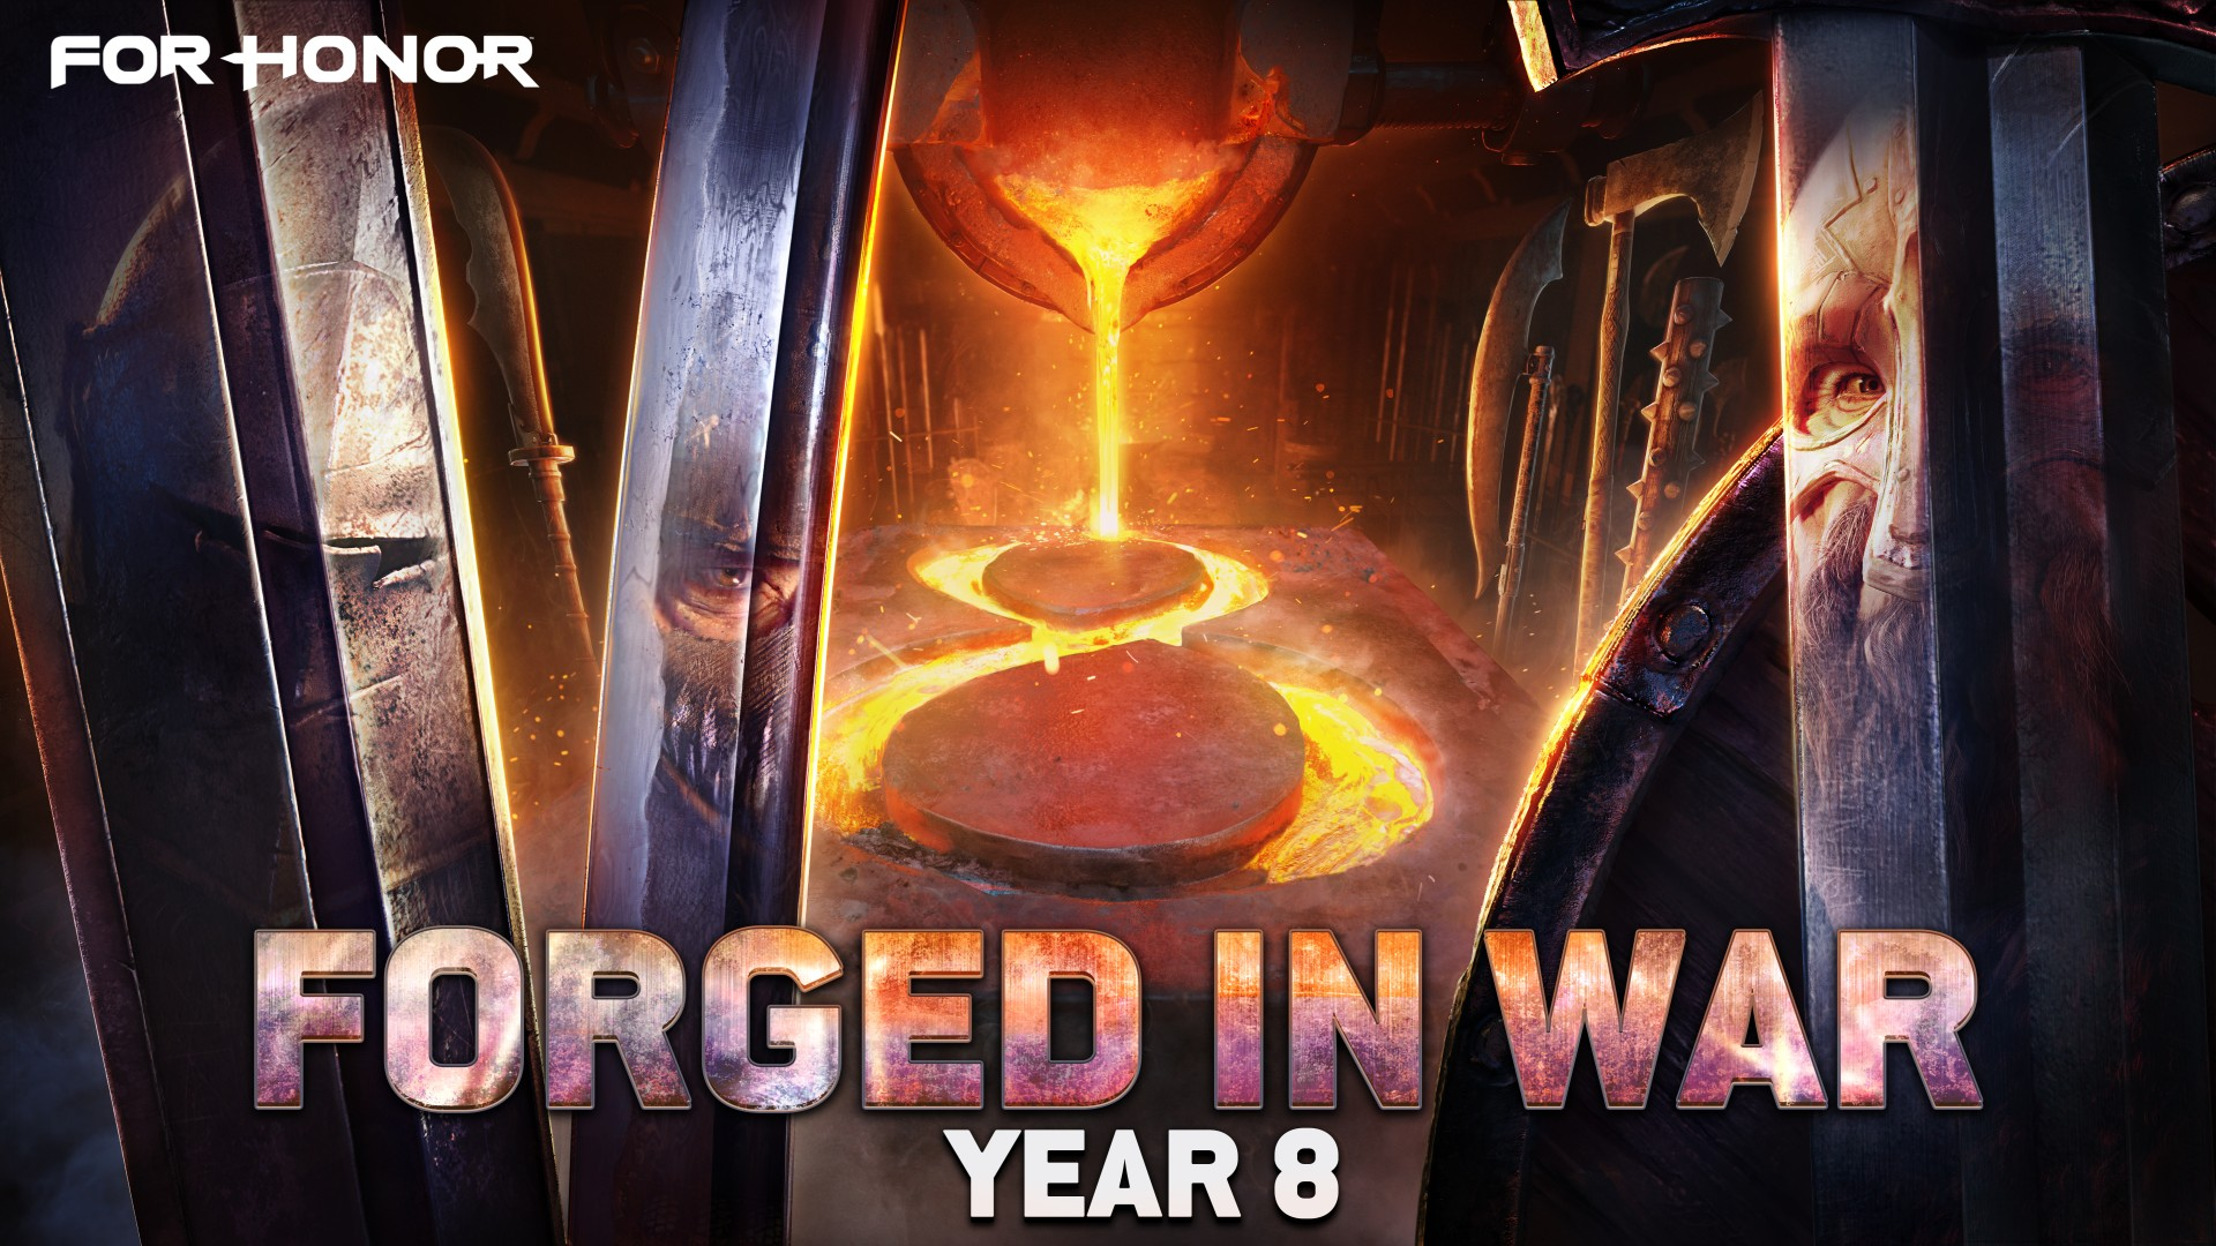 Preview: For Honor Year 8: Forged in War